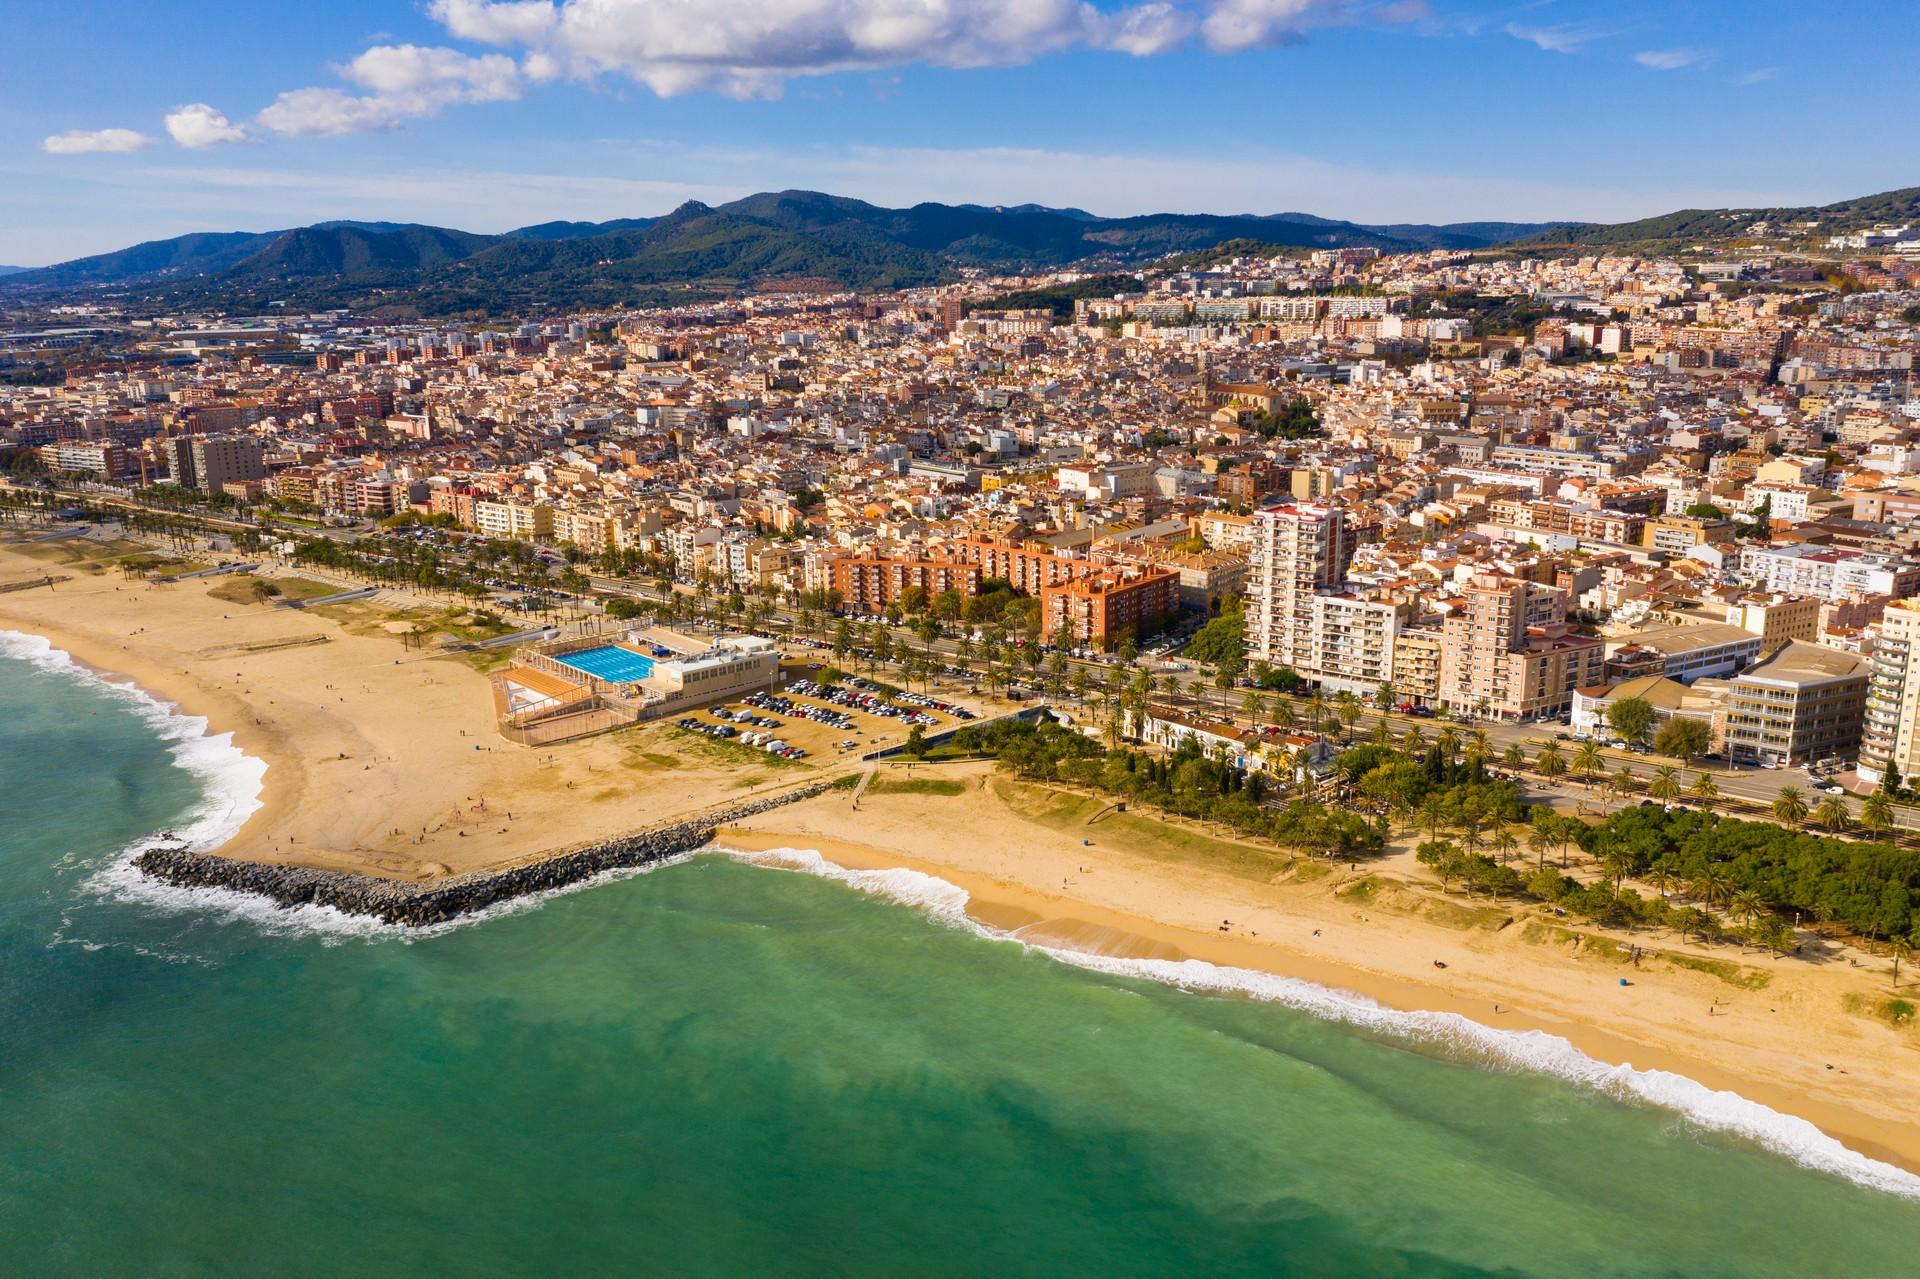 Mataró in partly cloudy weather